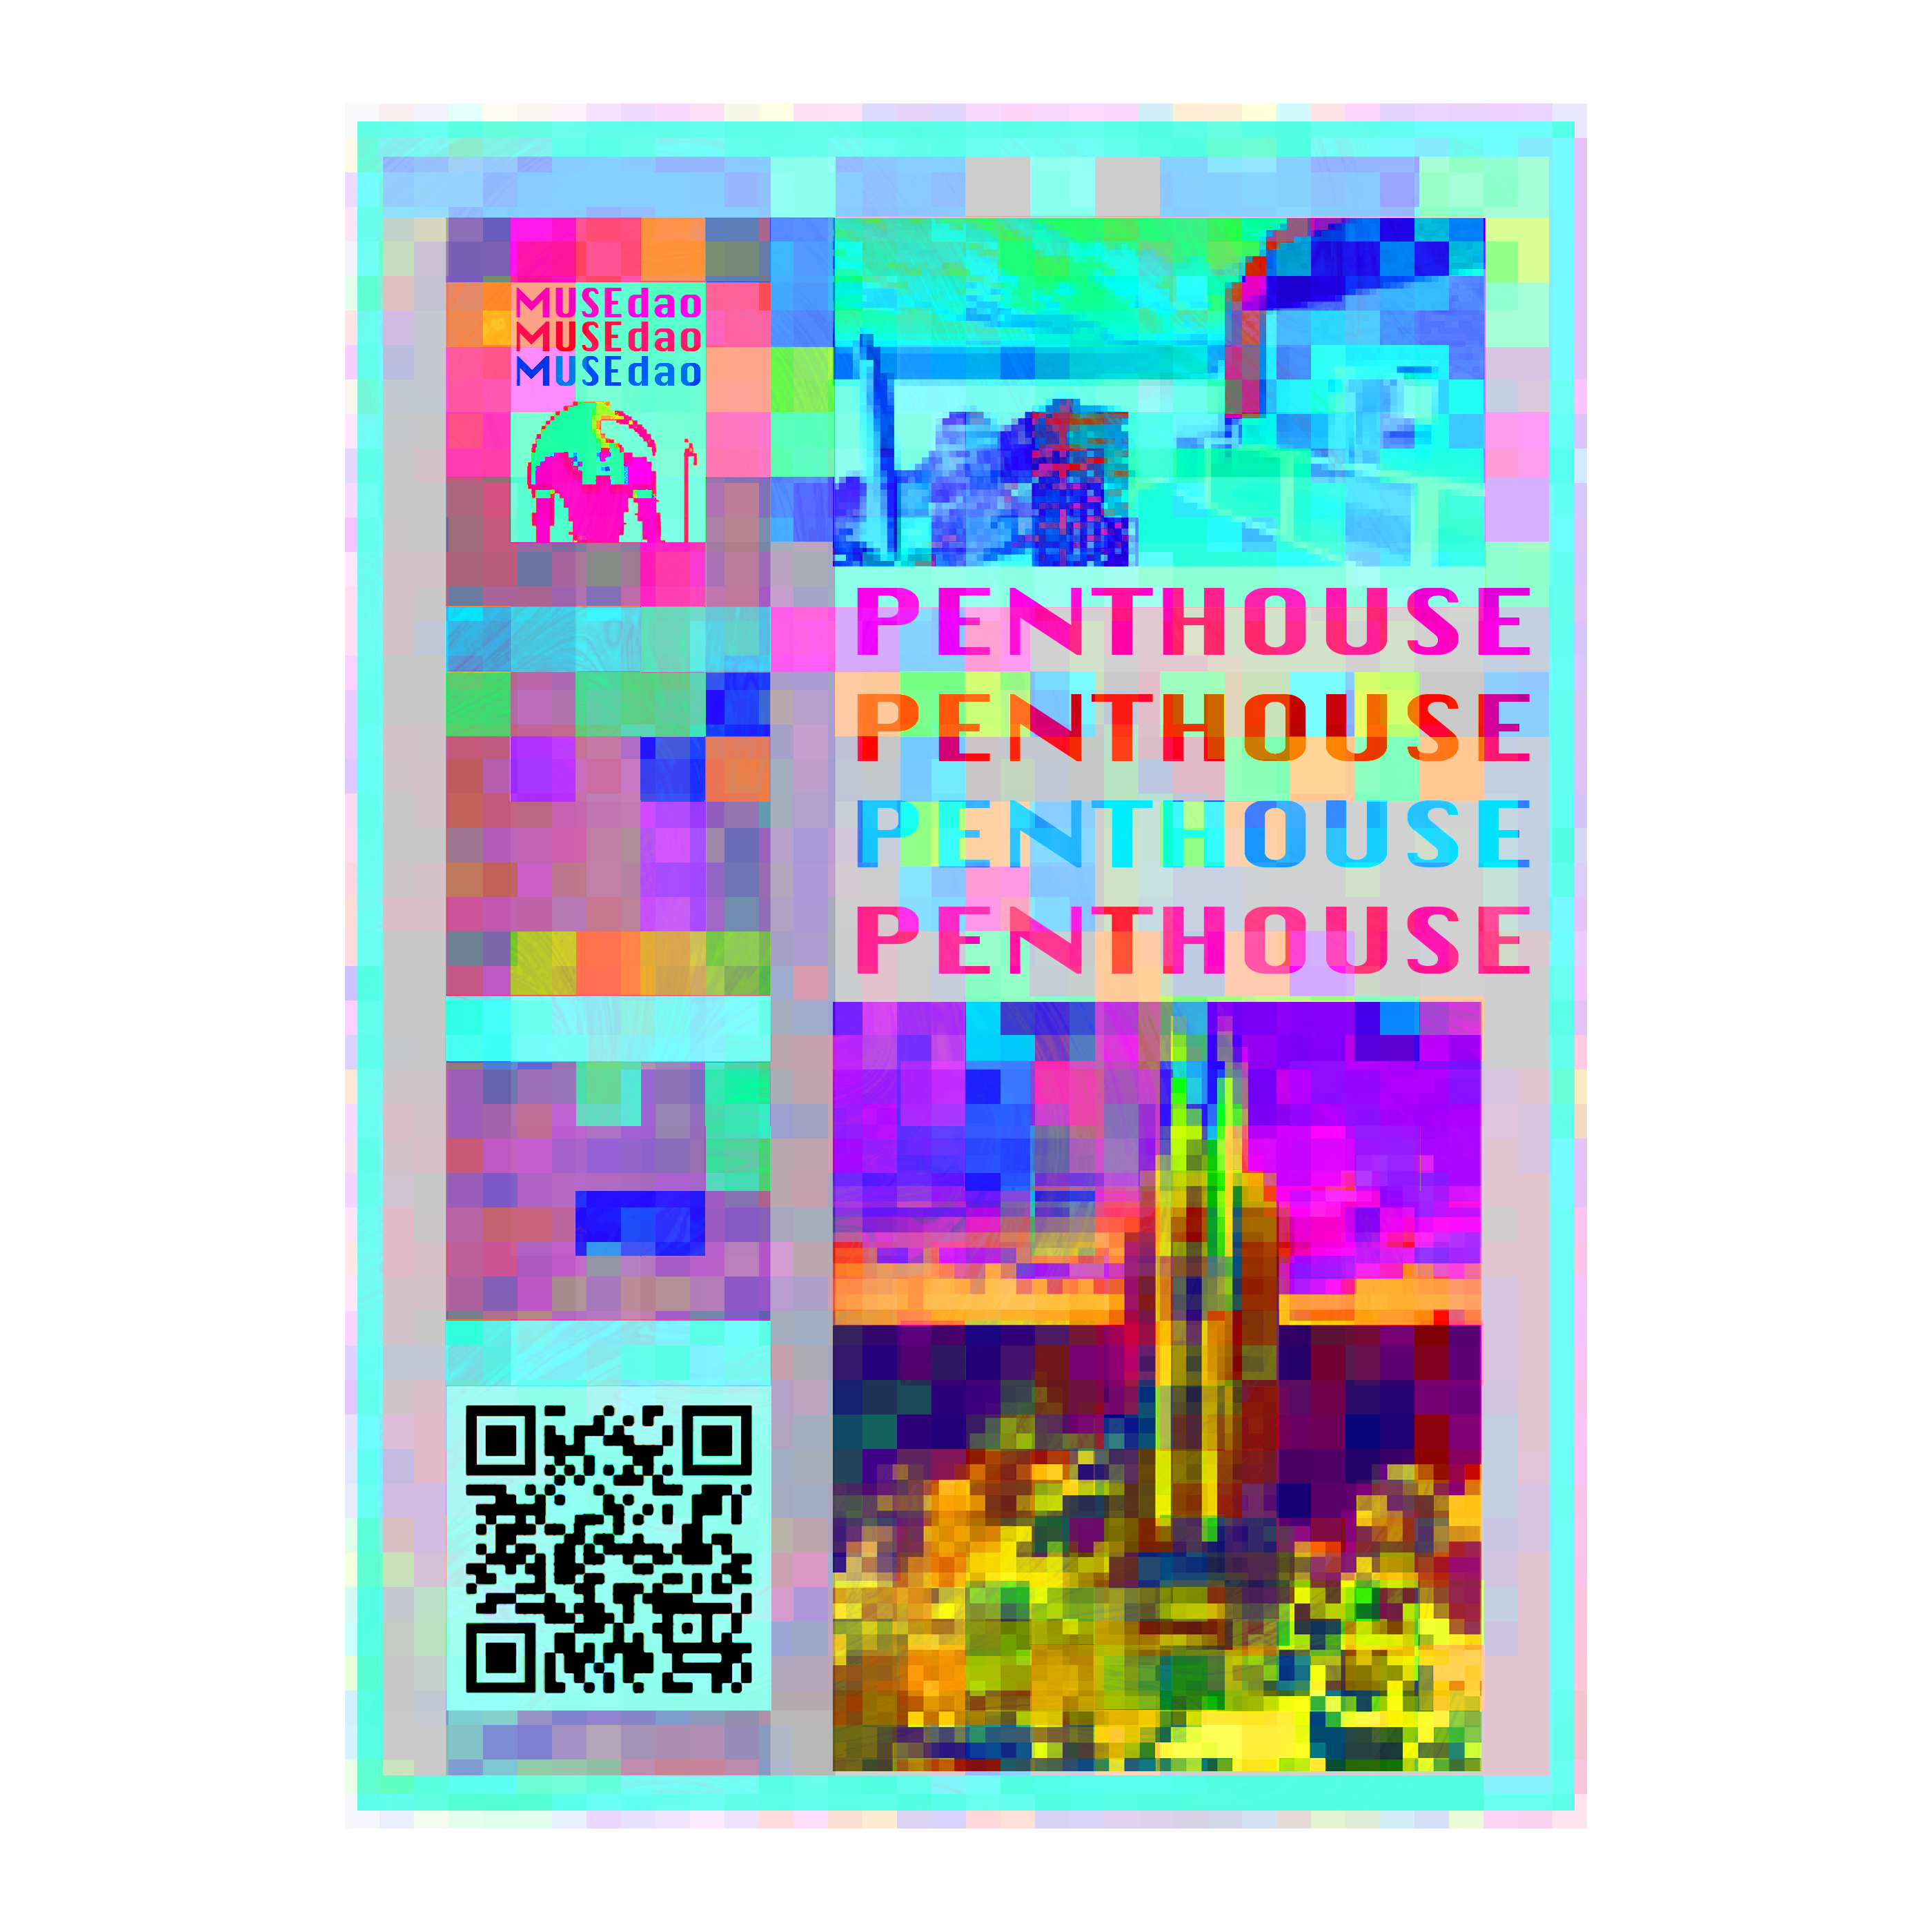 Penthouse Owner's Token - Draft Artwork, includes the right to propose building names, which will be voted on by all members of the building HOA